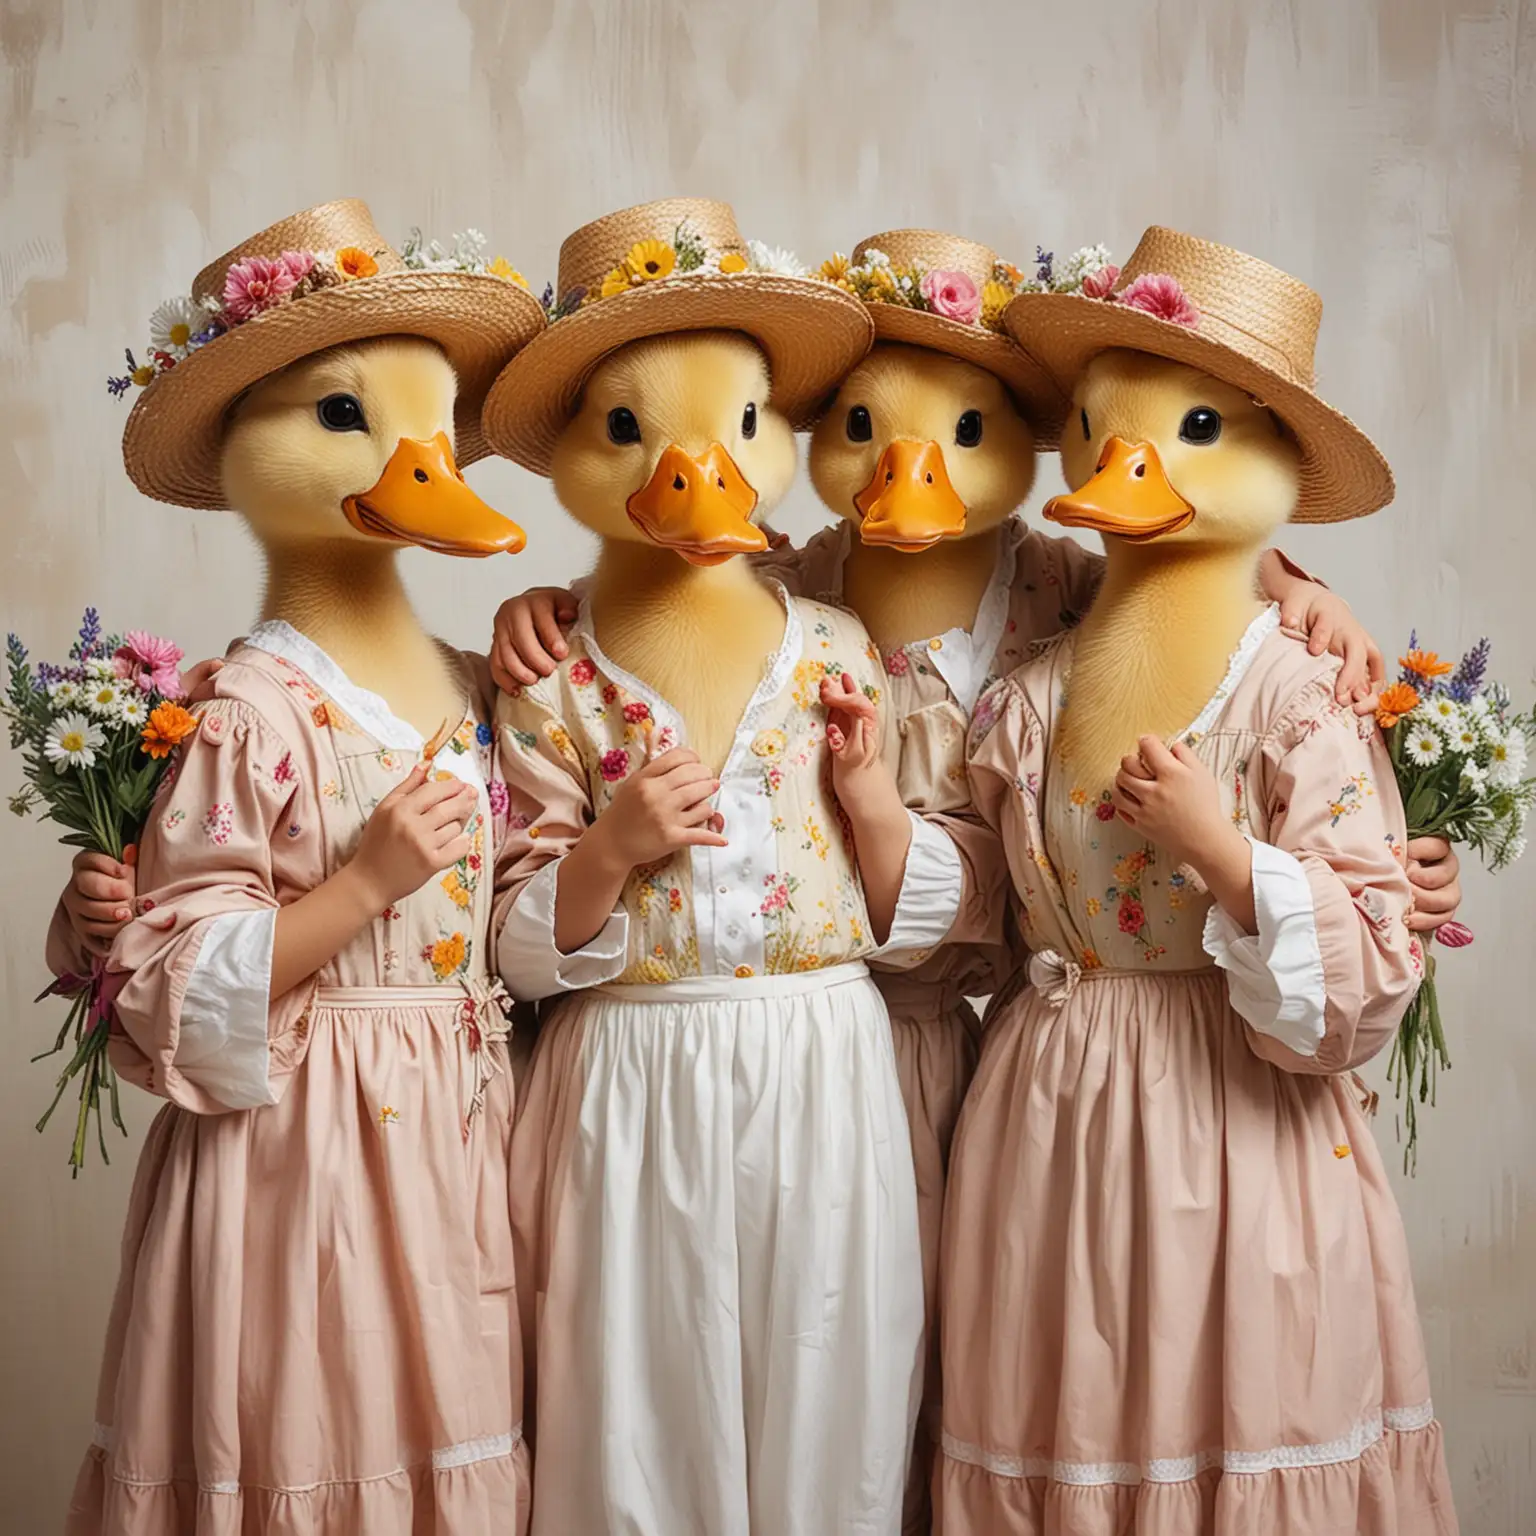 Four-Happy-Ducks-in-Human-Clothing-Celebrating-at-Girls-Party